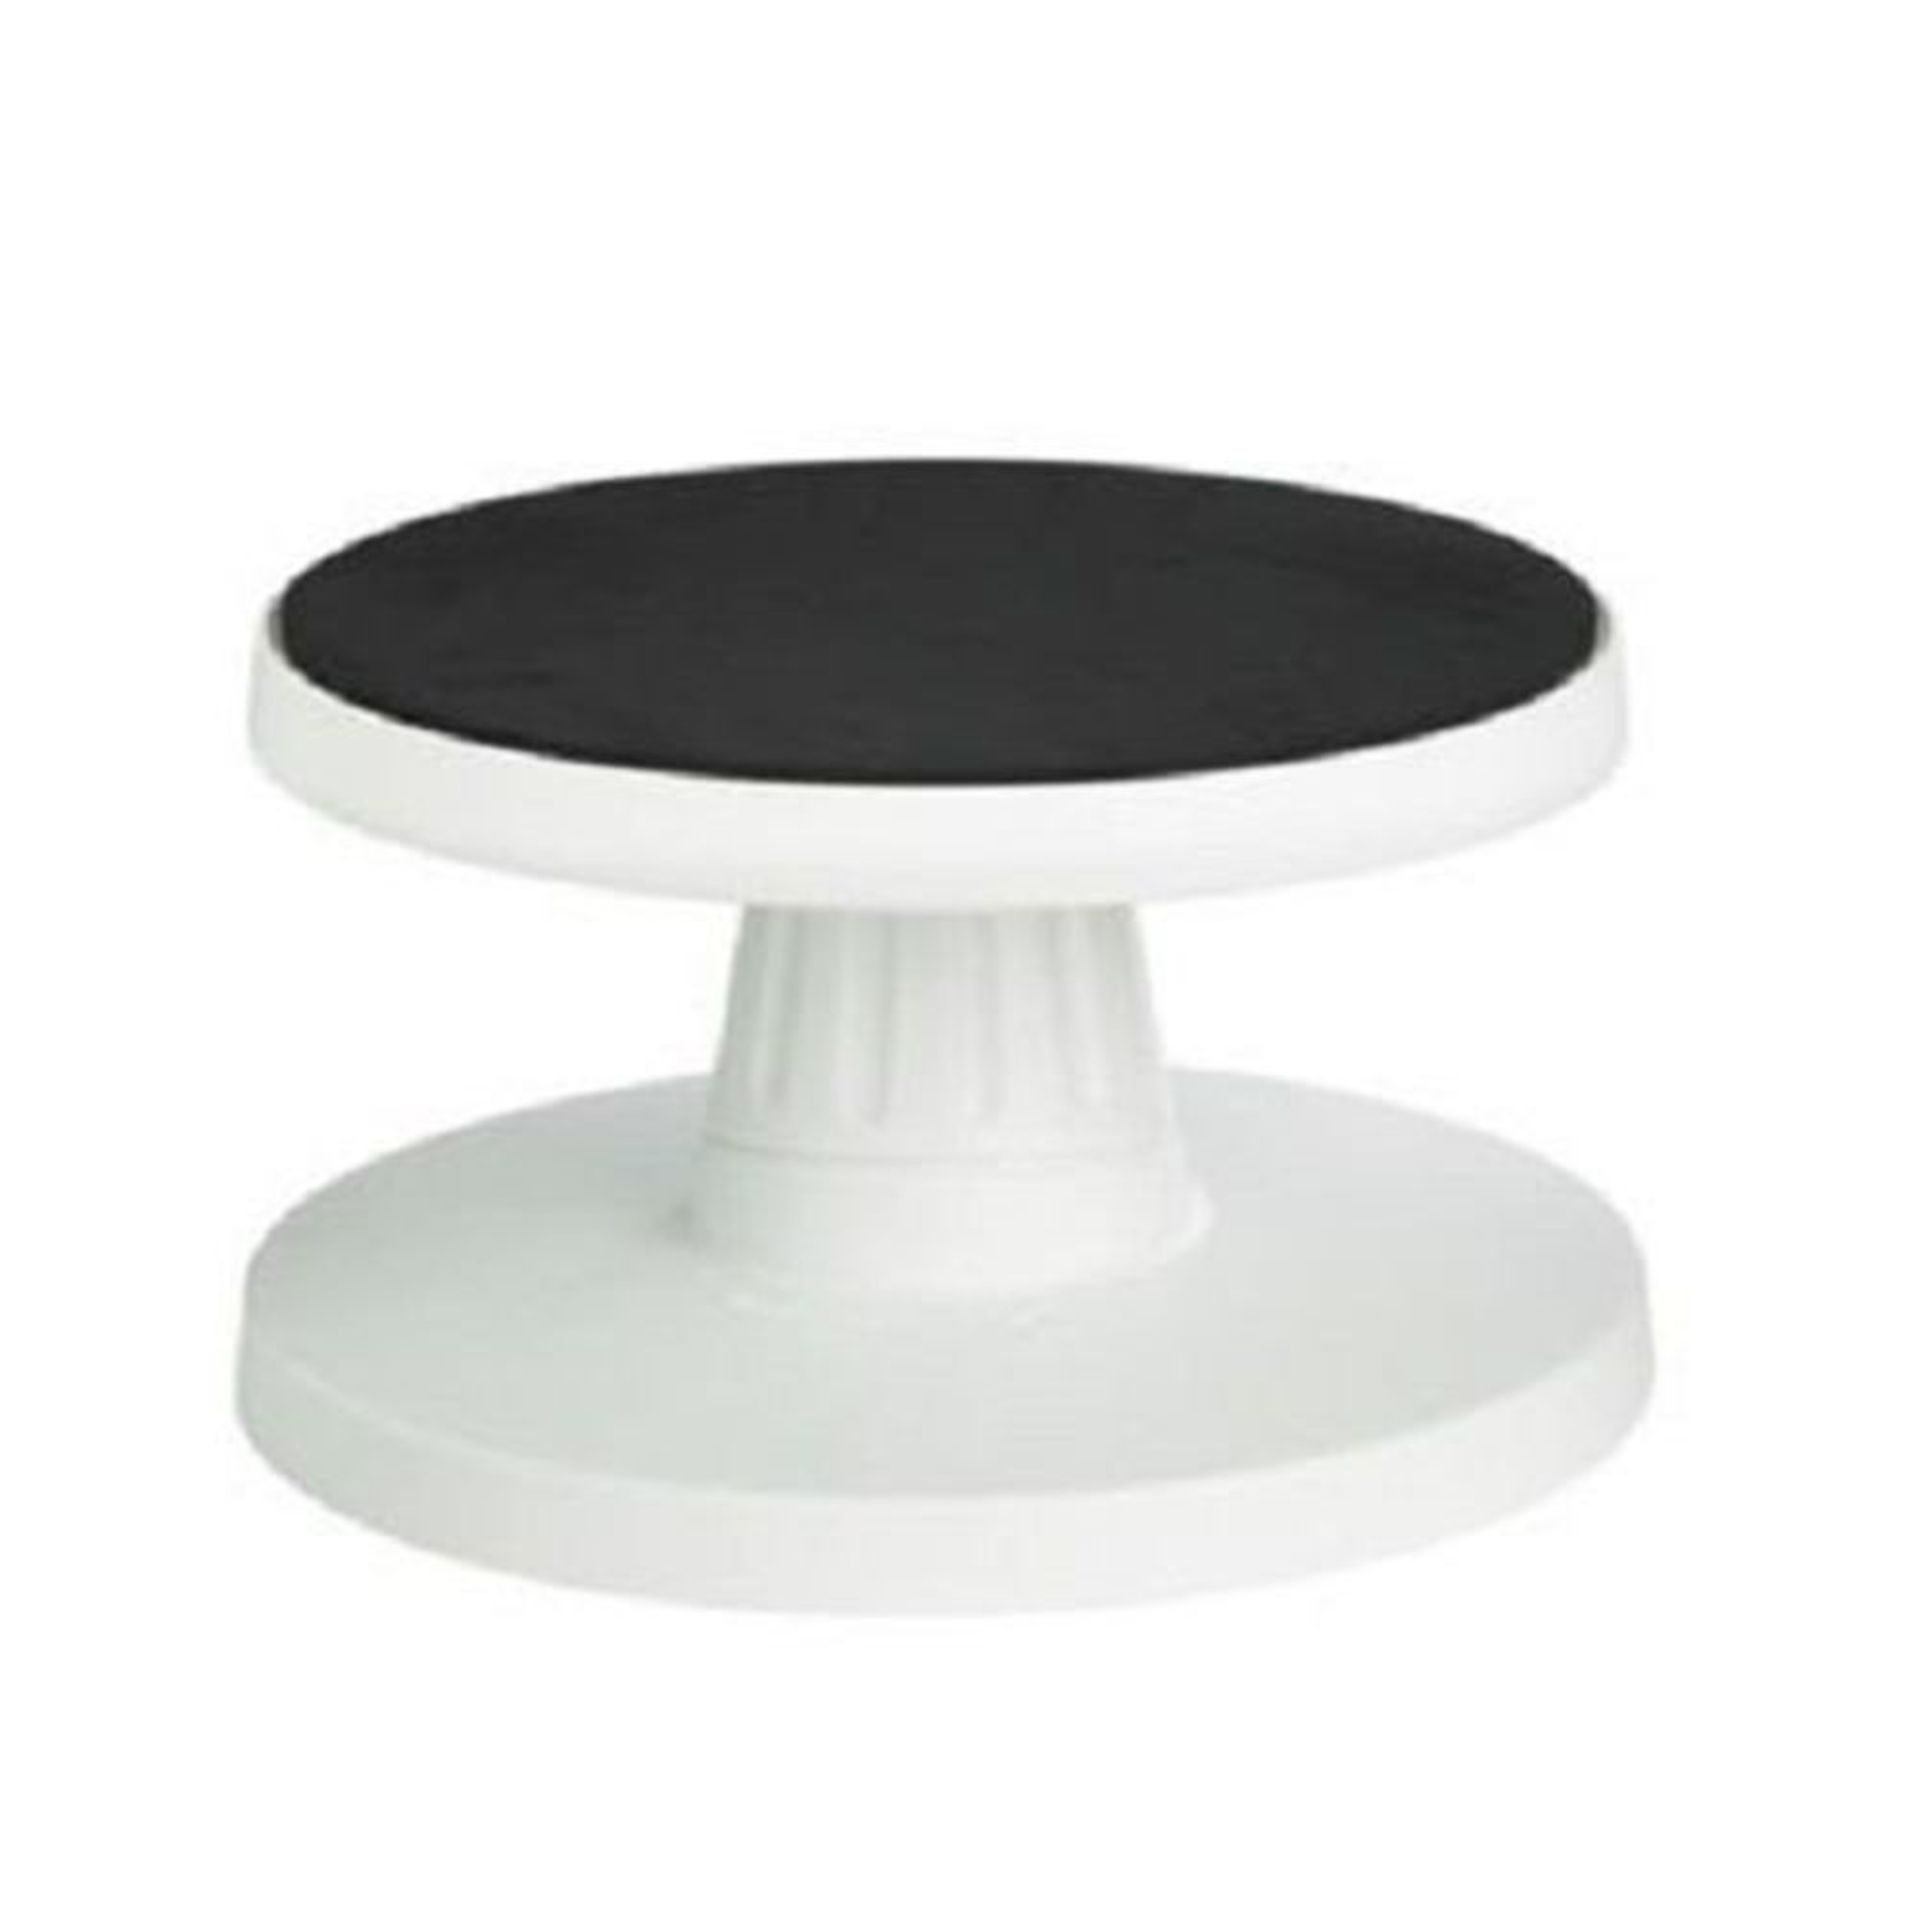 V *TRADE QTY* Brand New Adjustable Cake Decorating Table RRP £20.39 X 4 YOUR BID PRICE TO BE